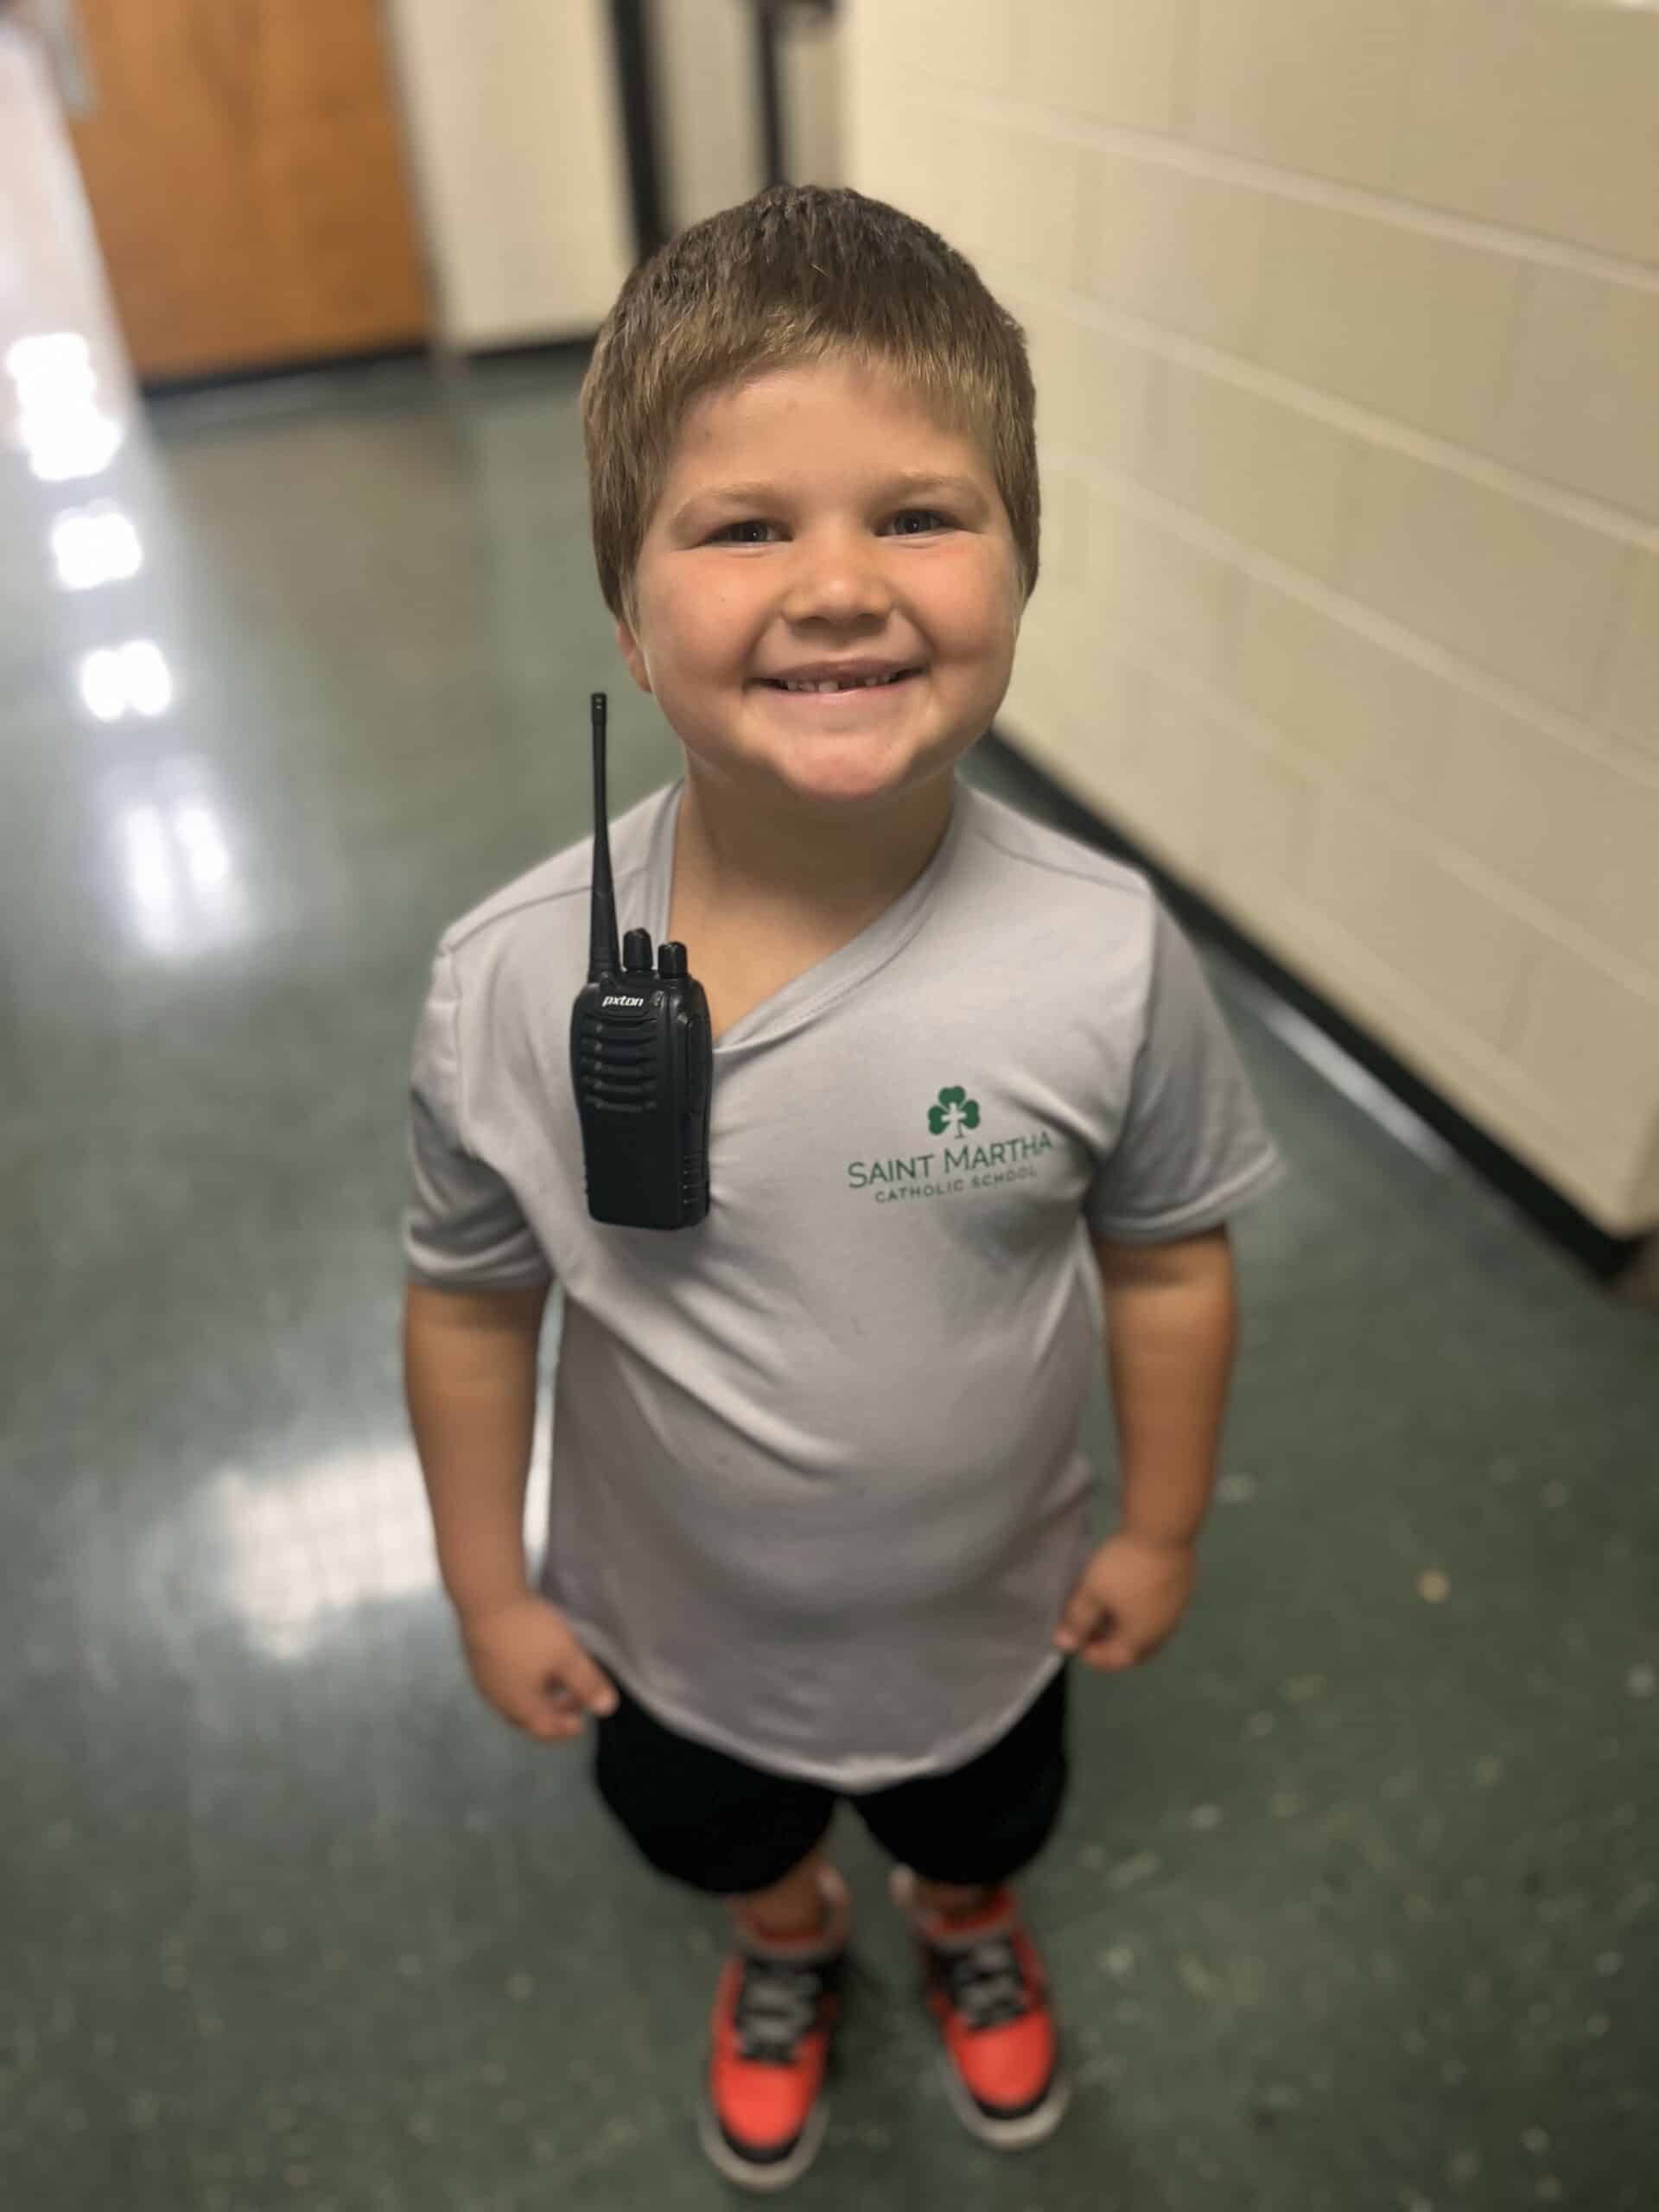 A young boy smiling while holding a walkie talkie.